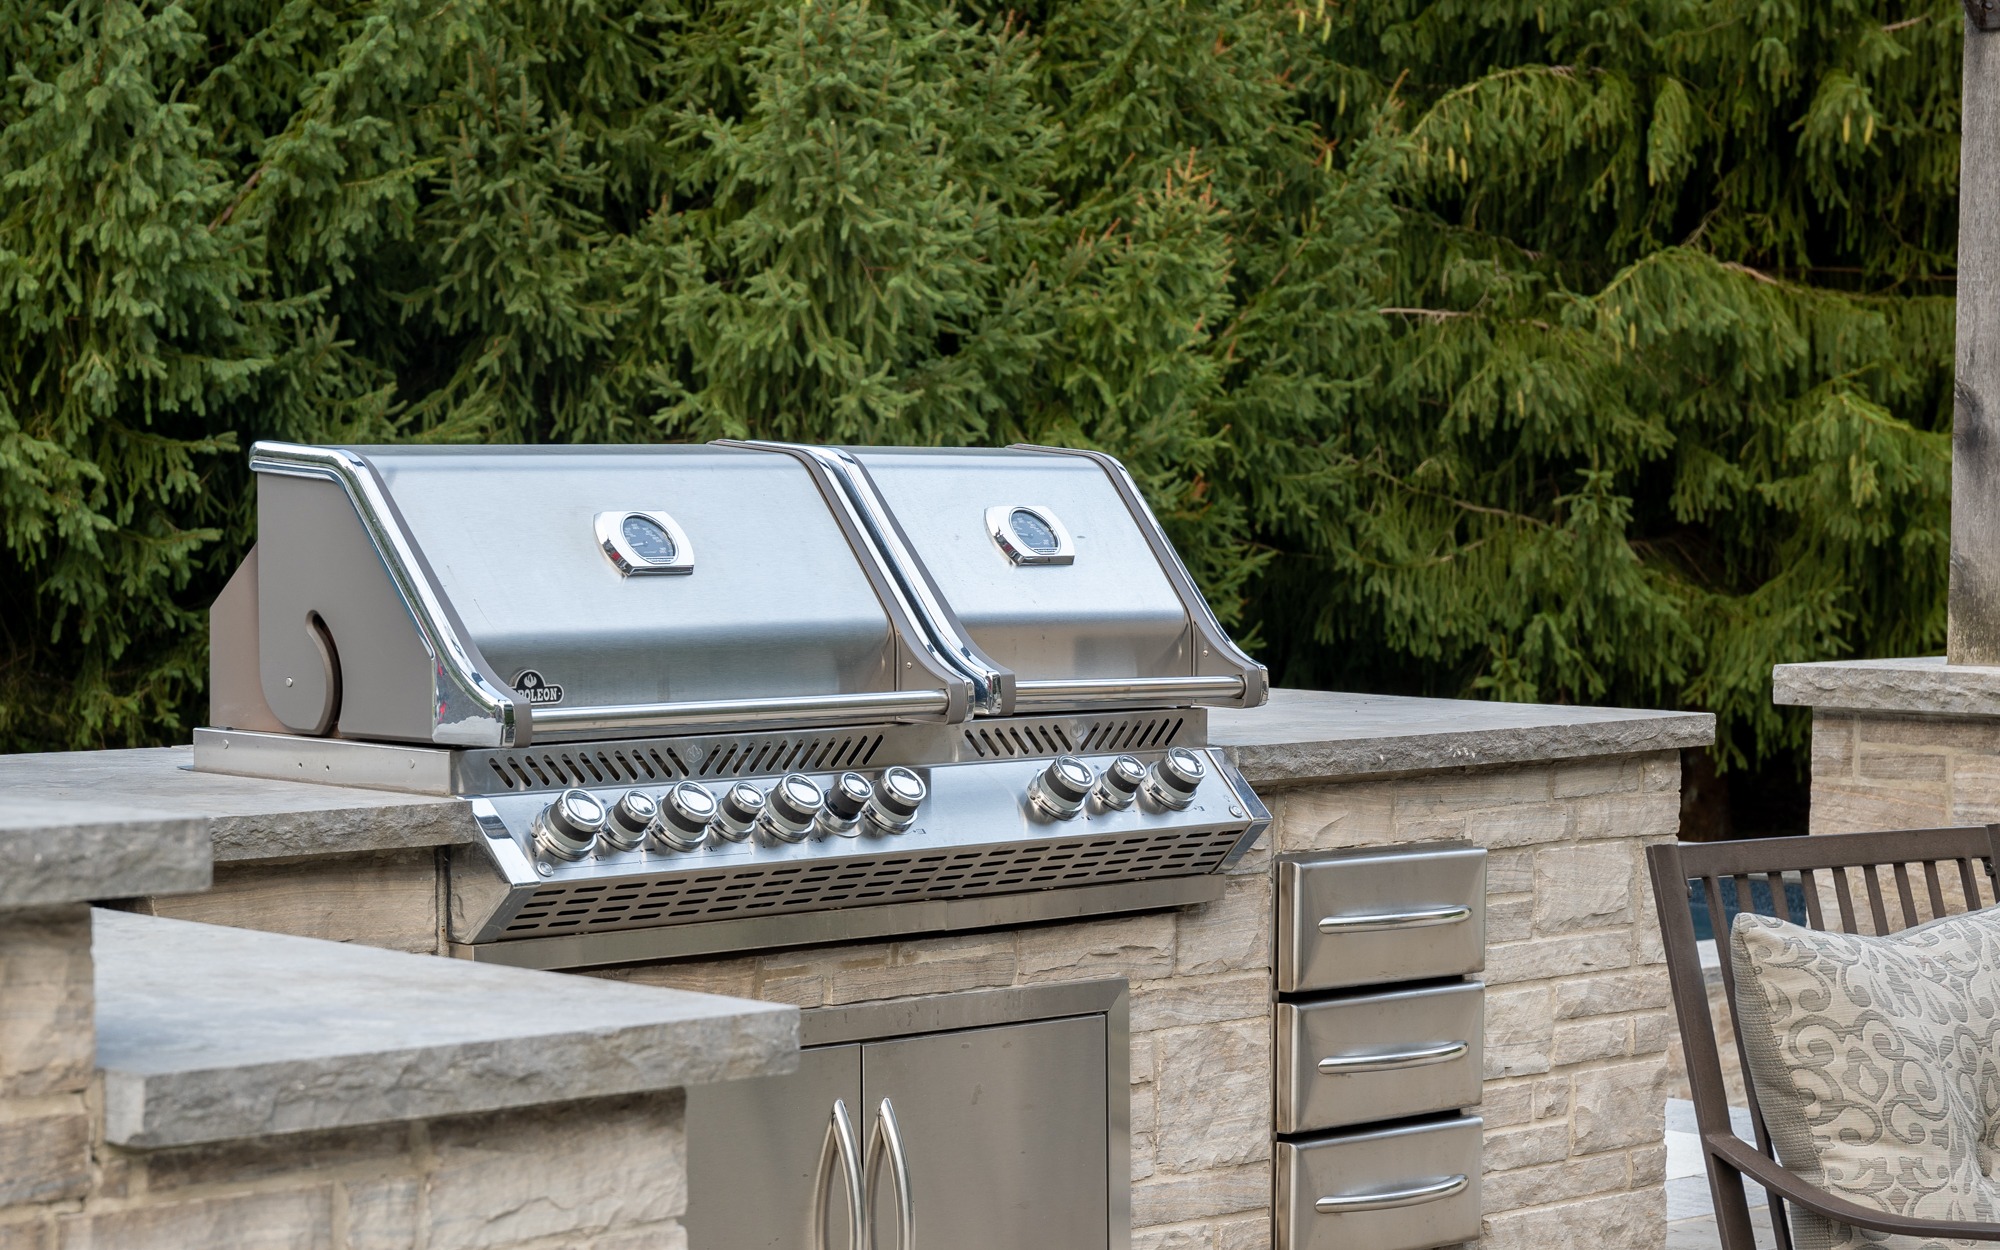 An outdoor kitchen with two stainless steel grills built into a stone counter, with evergreen trees in the background and patio furniture nearby.